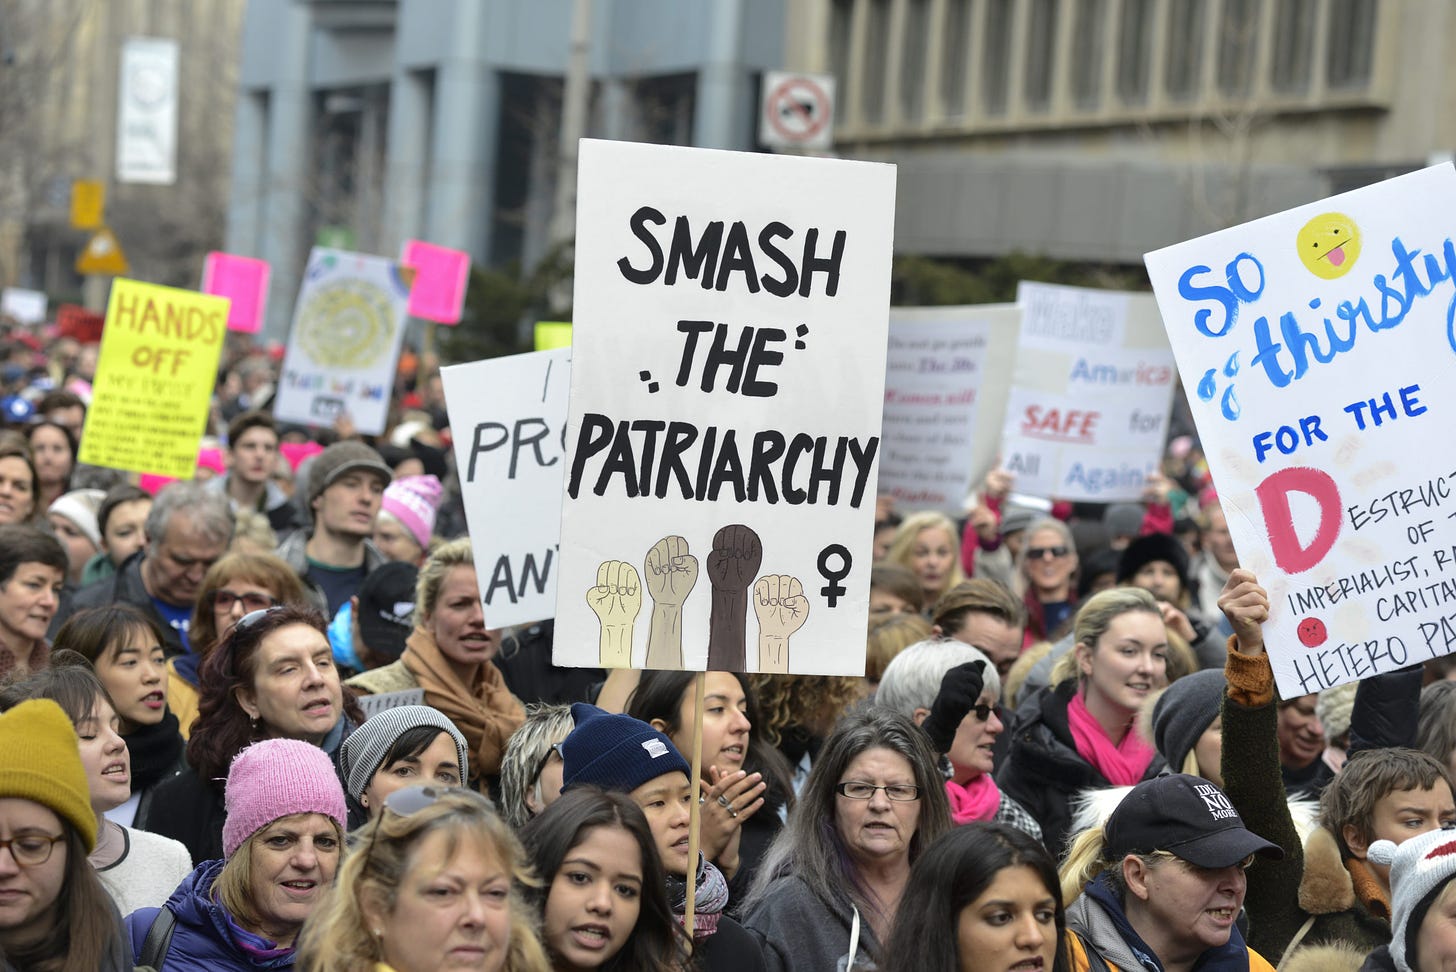 Three Cheers for the Patriarchy - The American Conservative